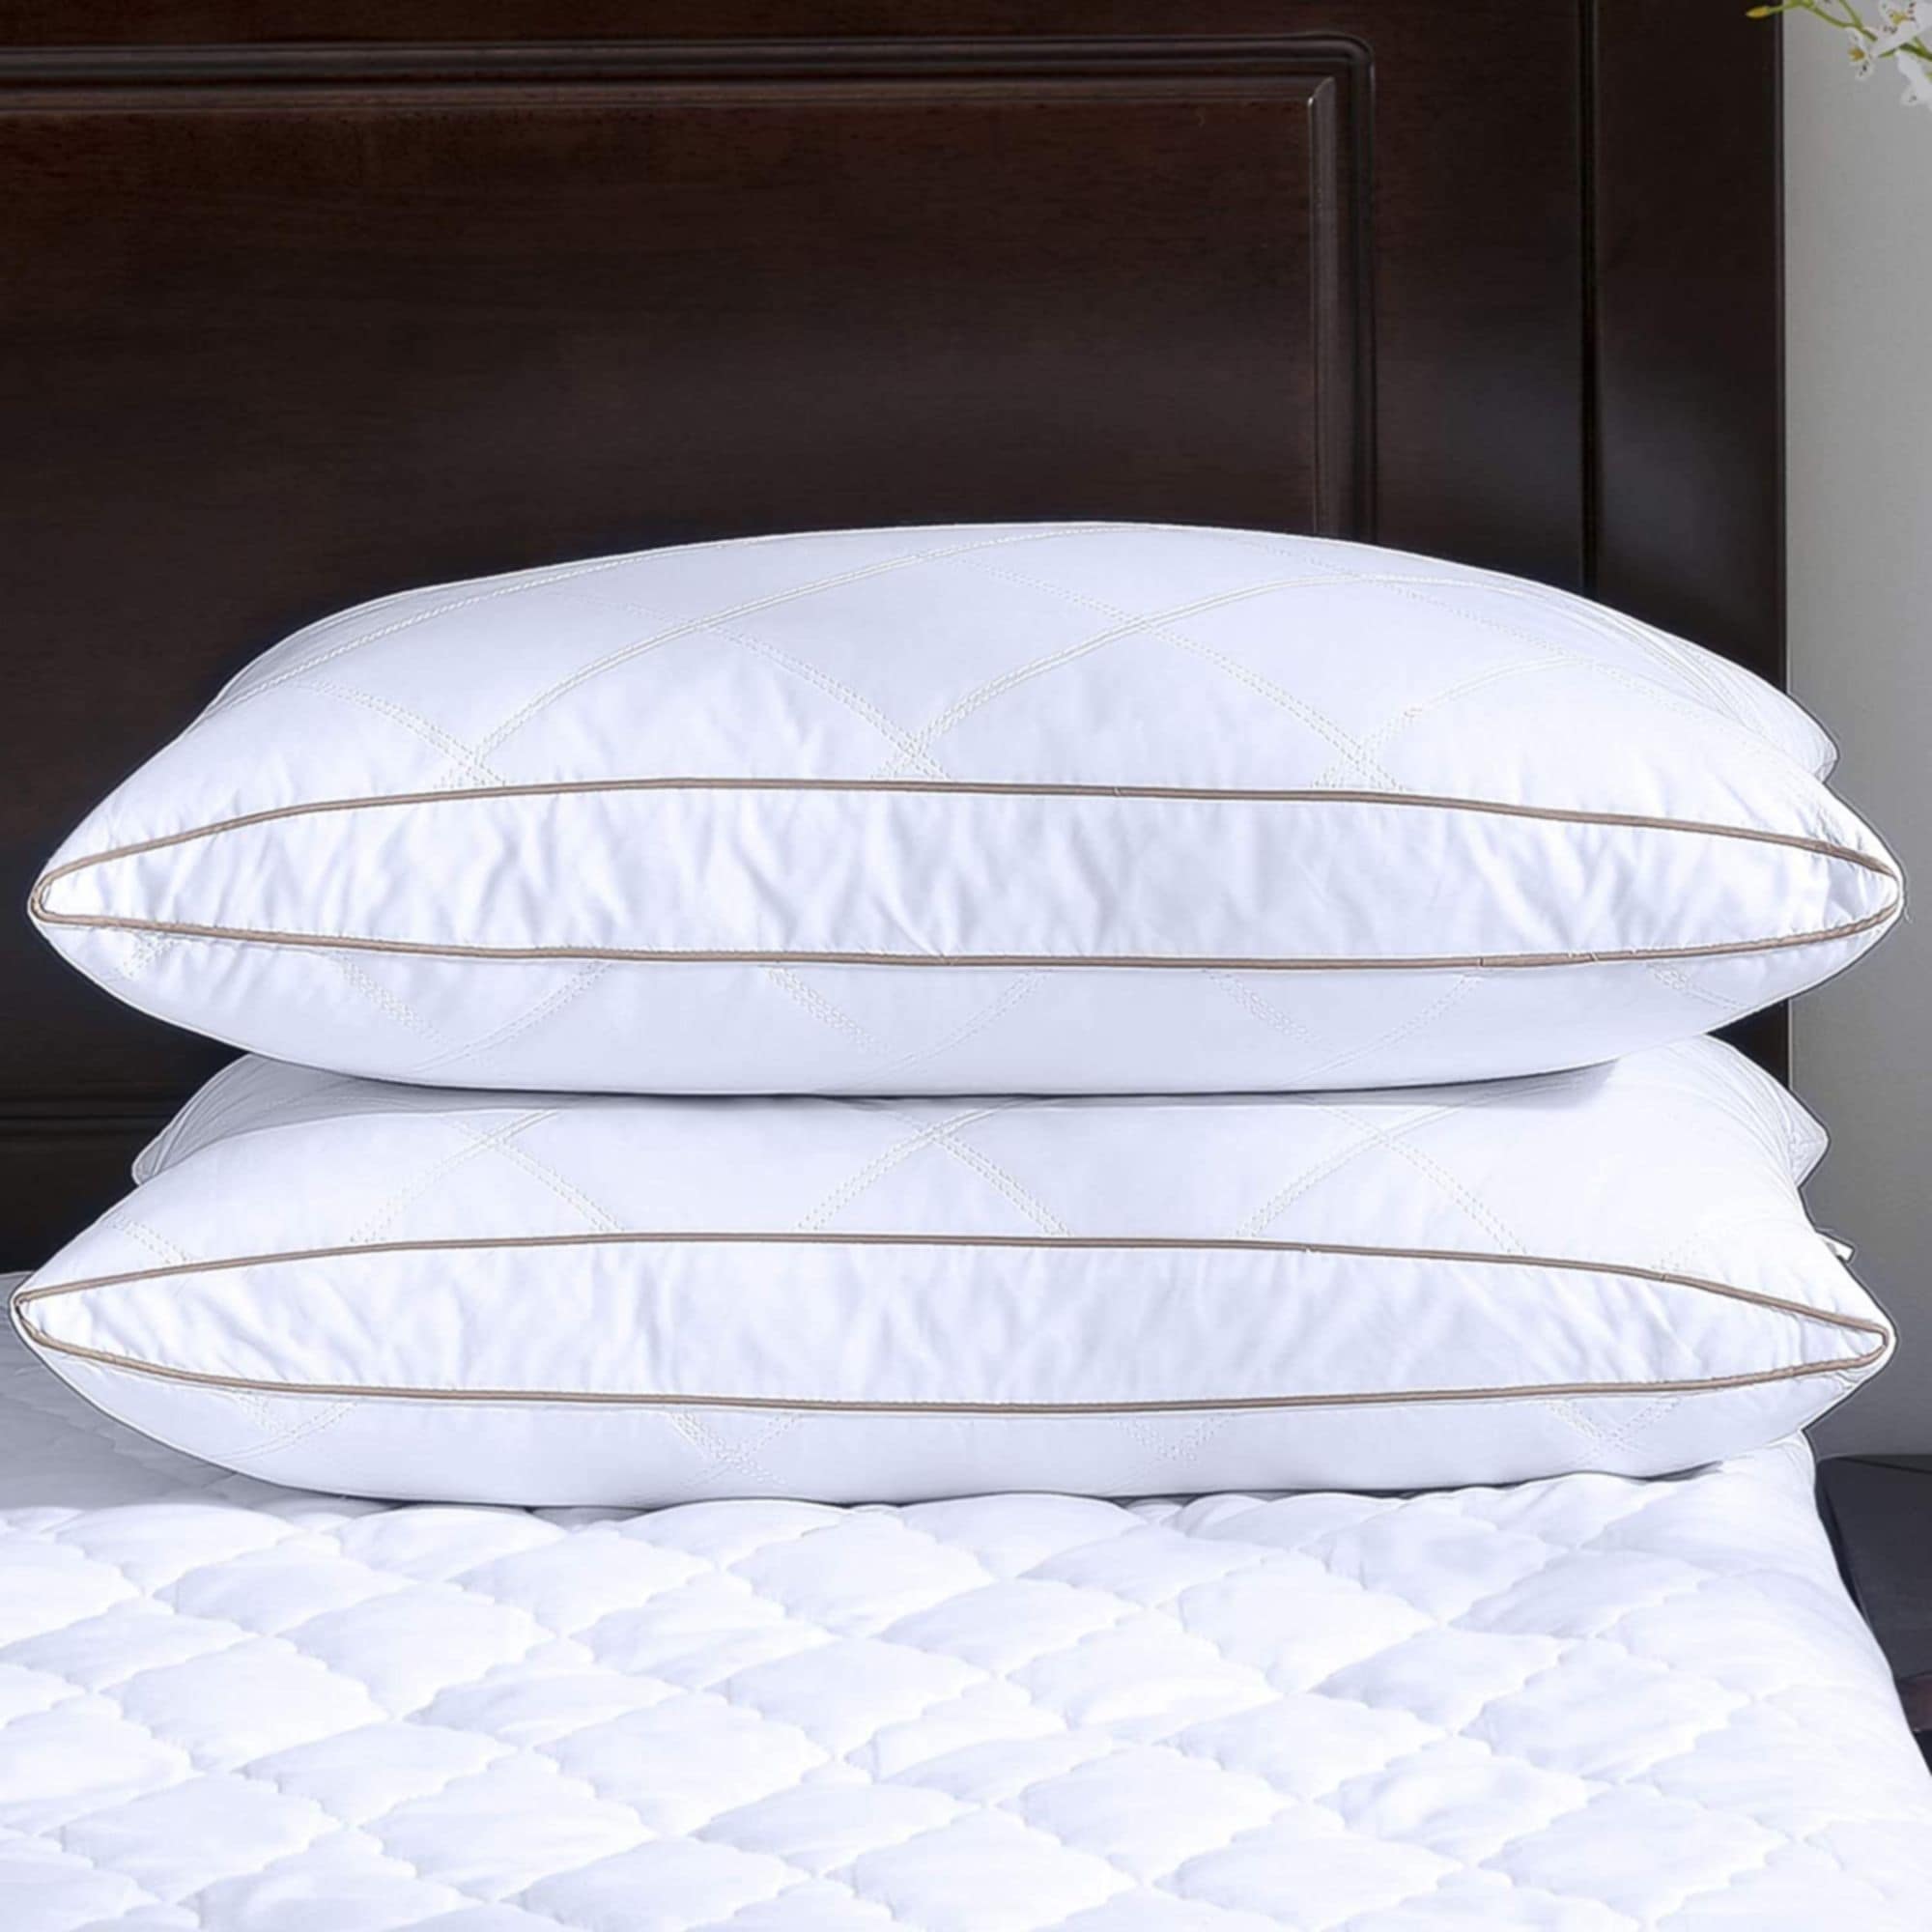 https://ak1.ostkcdn.com/images/products/is/images/direct/1b03073e3ad7a7d32457e510b6068c954c91d4d0/2-Pack-Quilted-Gusseted-Feather-and-Down-Pillows.jpg